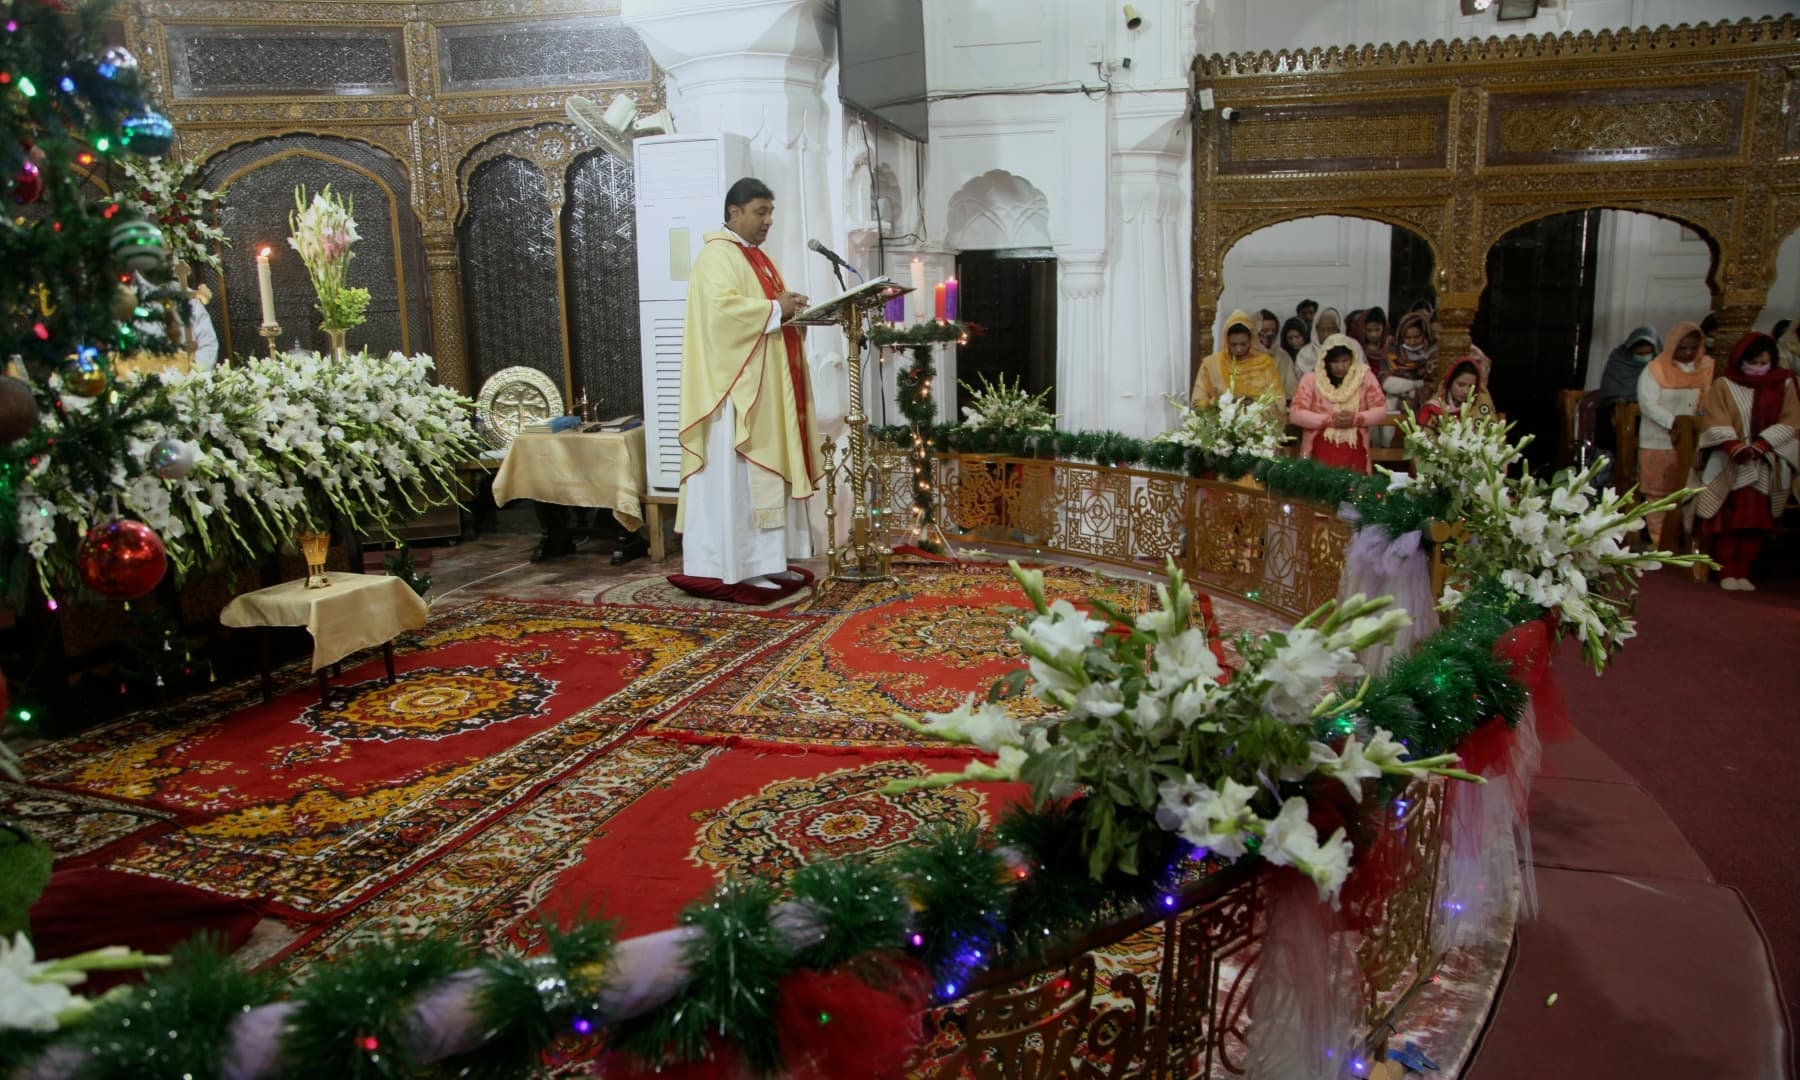 Devotees attend a Christmas mass at All Saints' Anglican Church in Peshawar on December 25, 2021. — AP